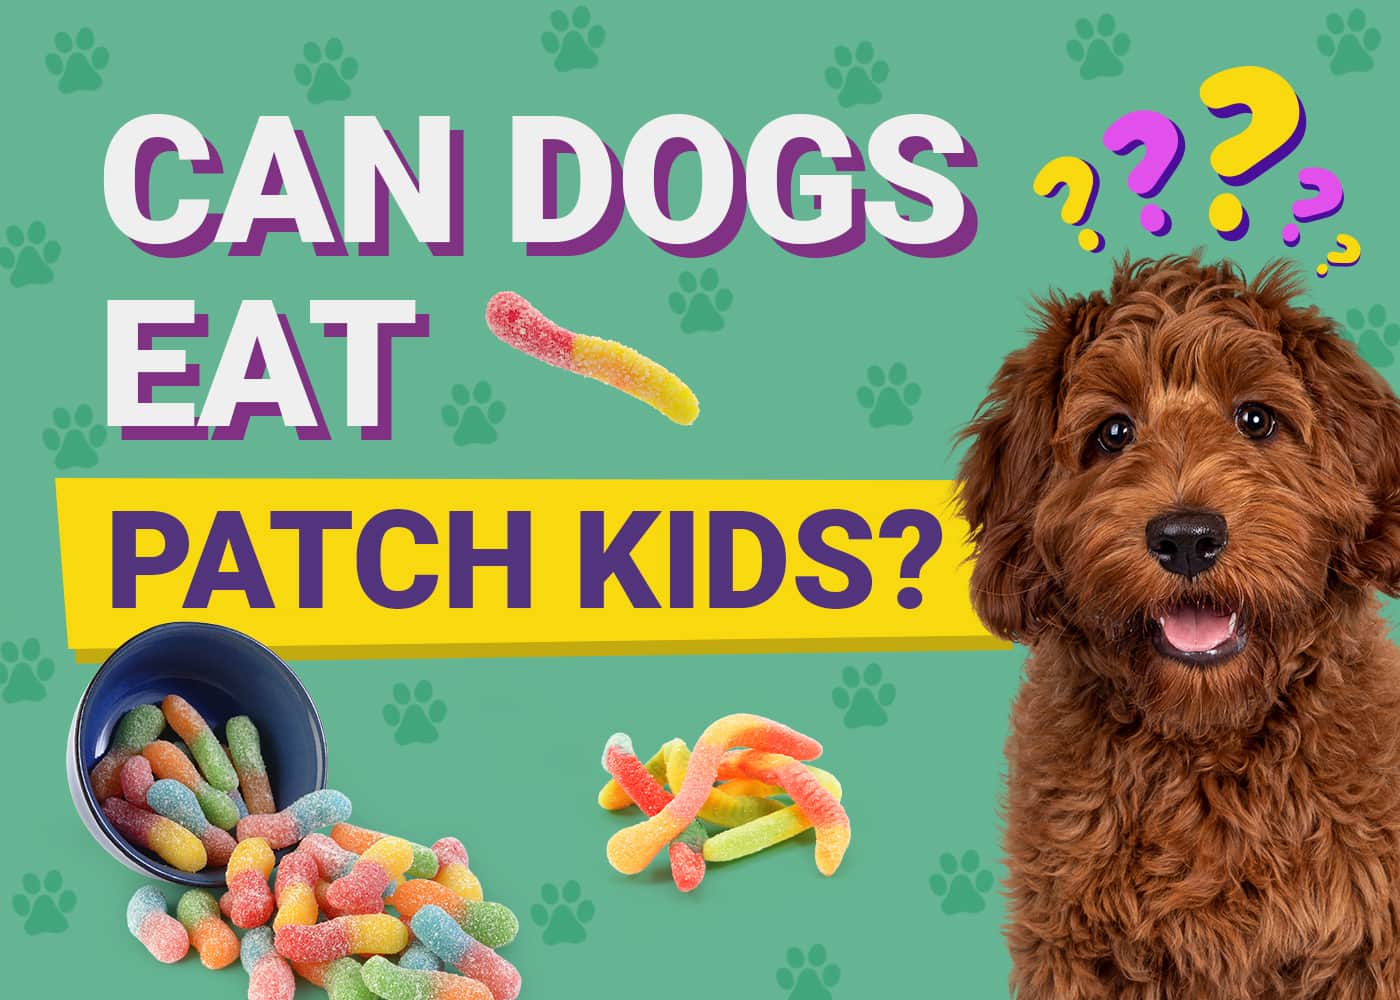 Can Dogs Eat_patch kids